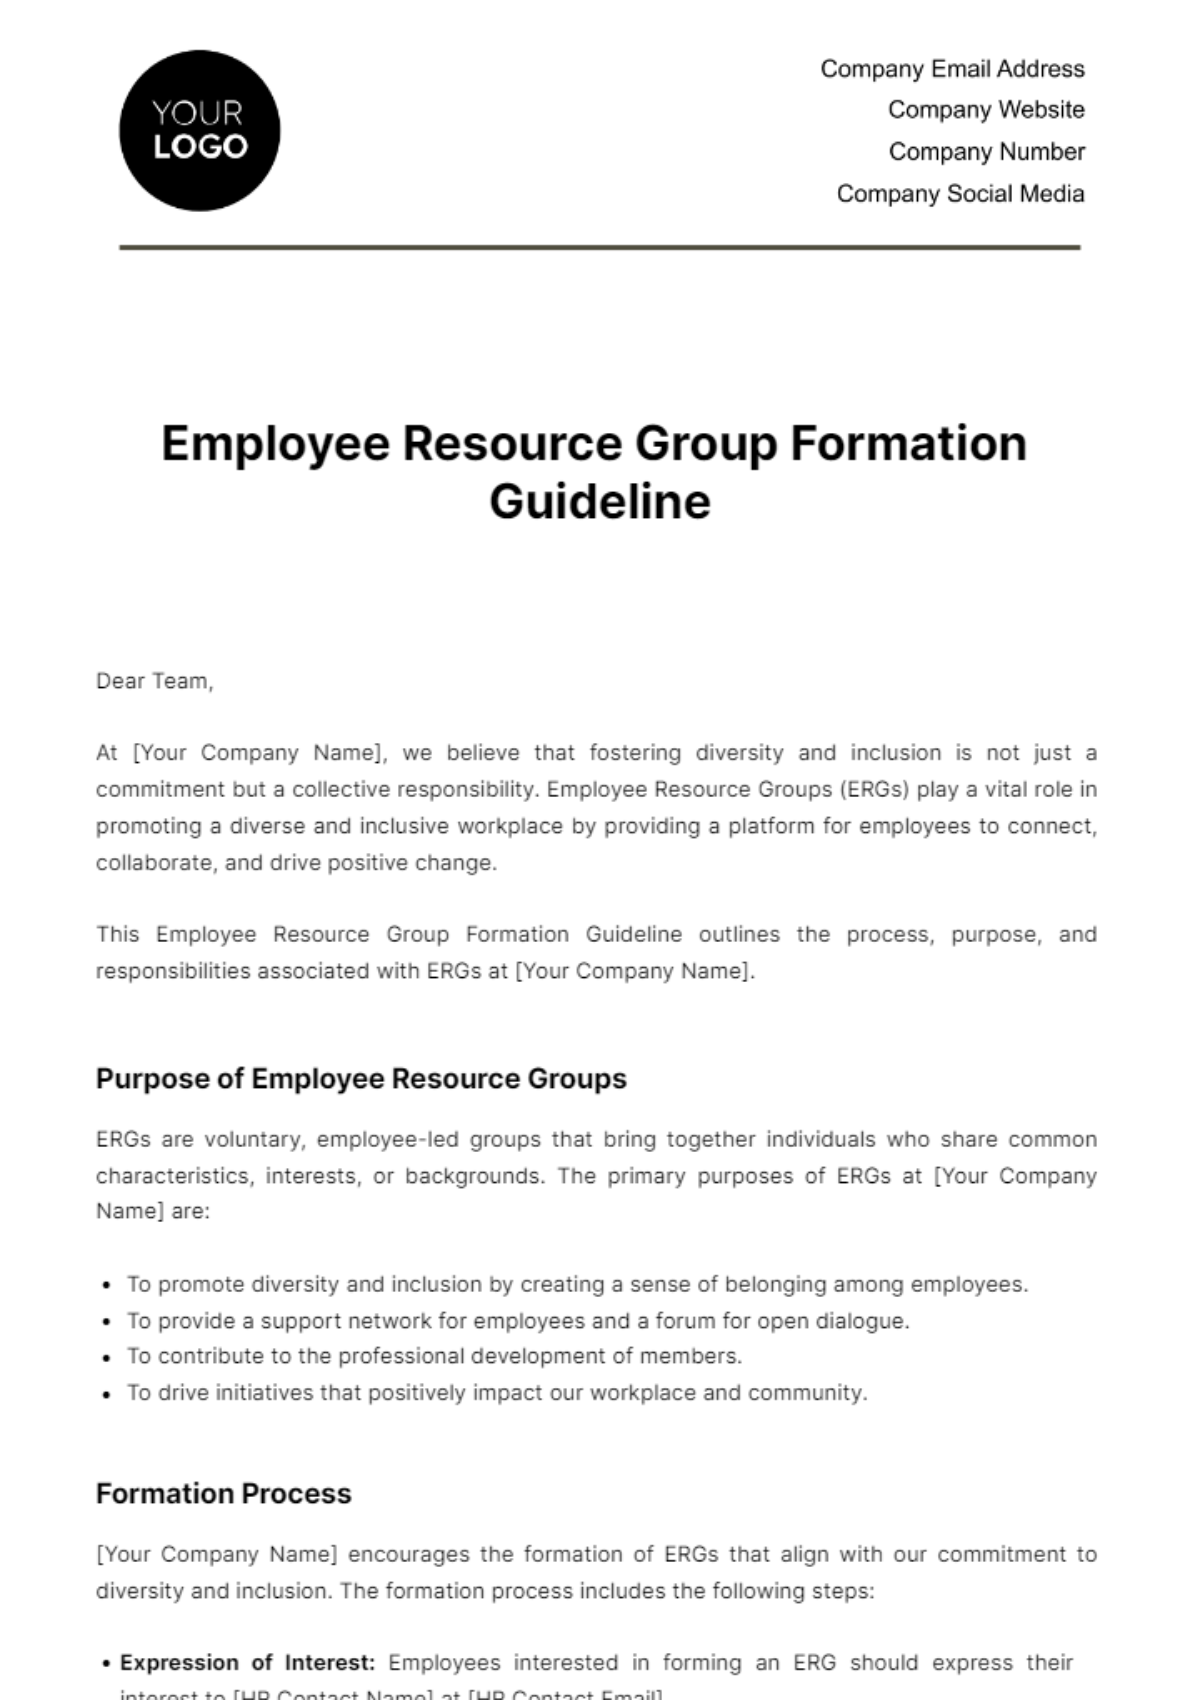 Employee Resource Group Formation Guideline HR Template